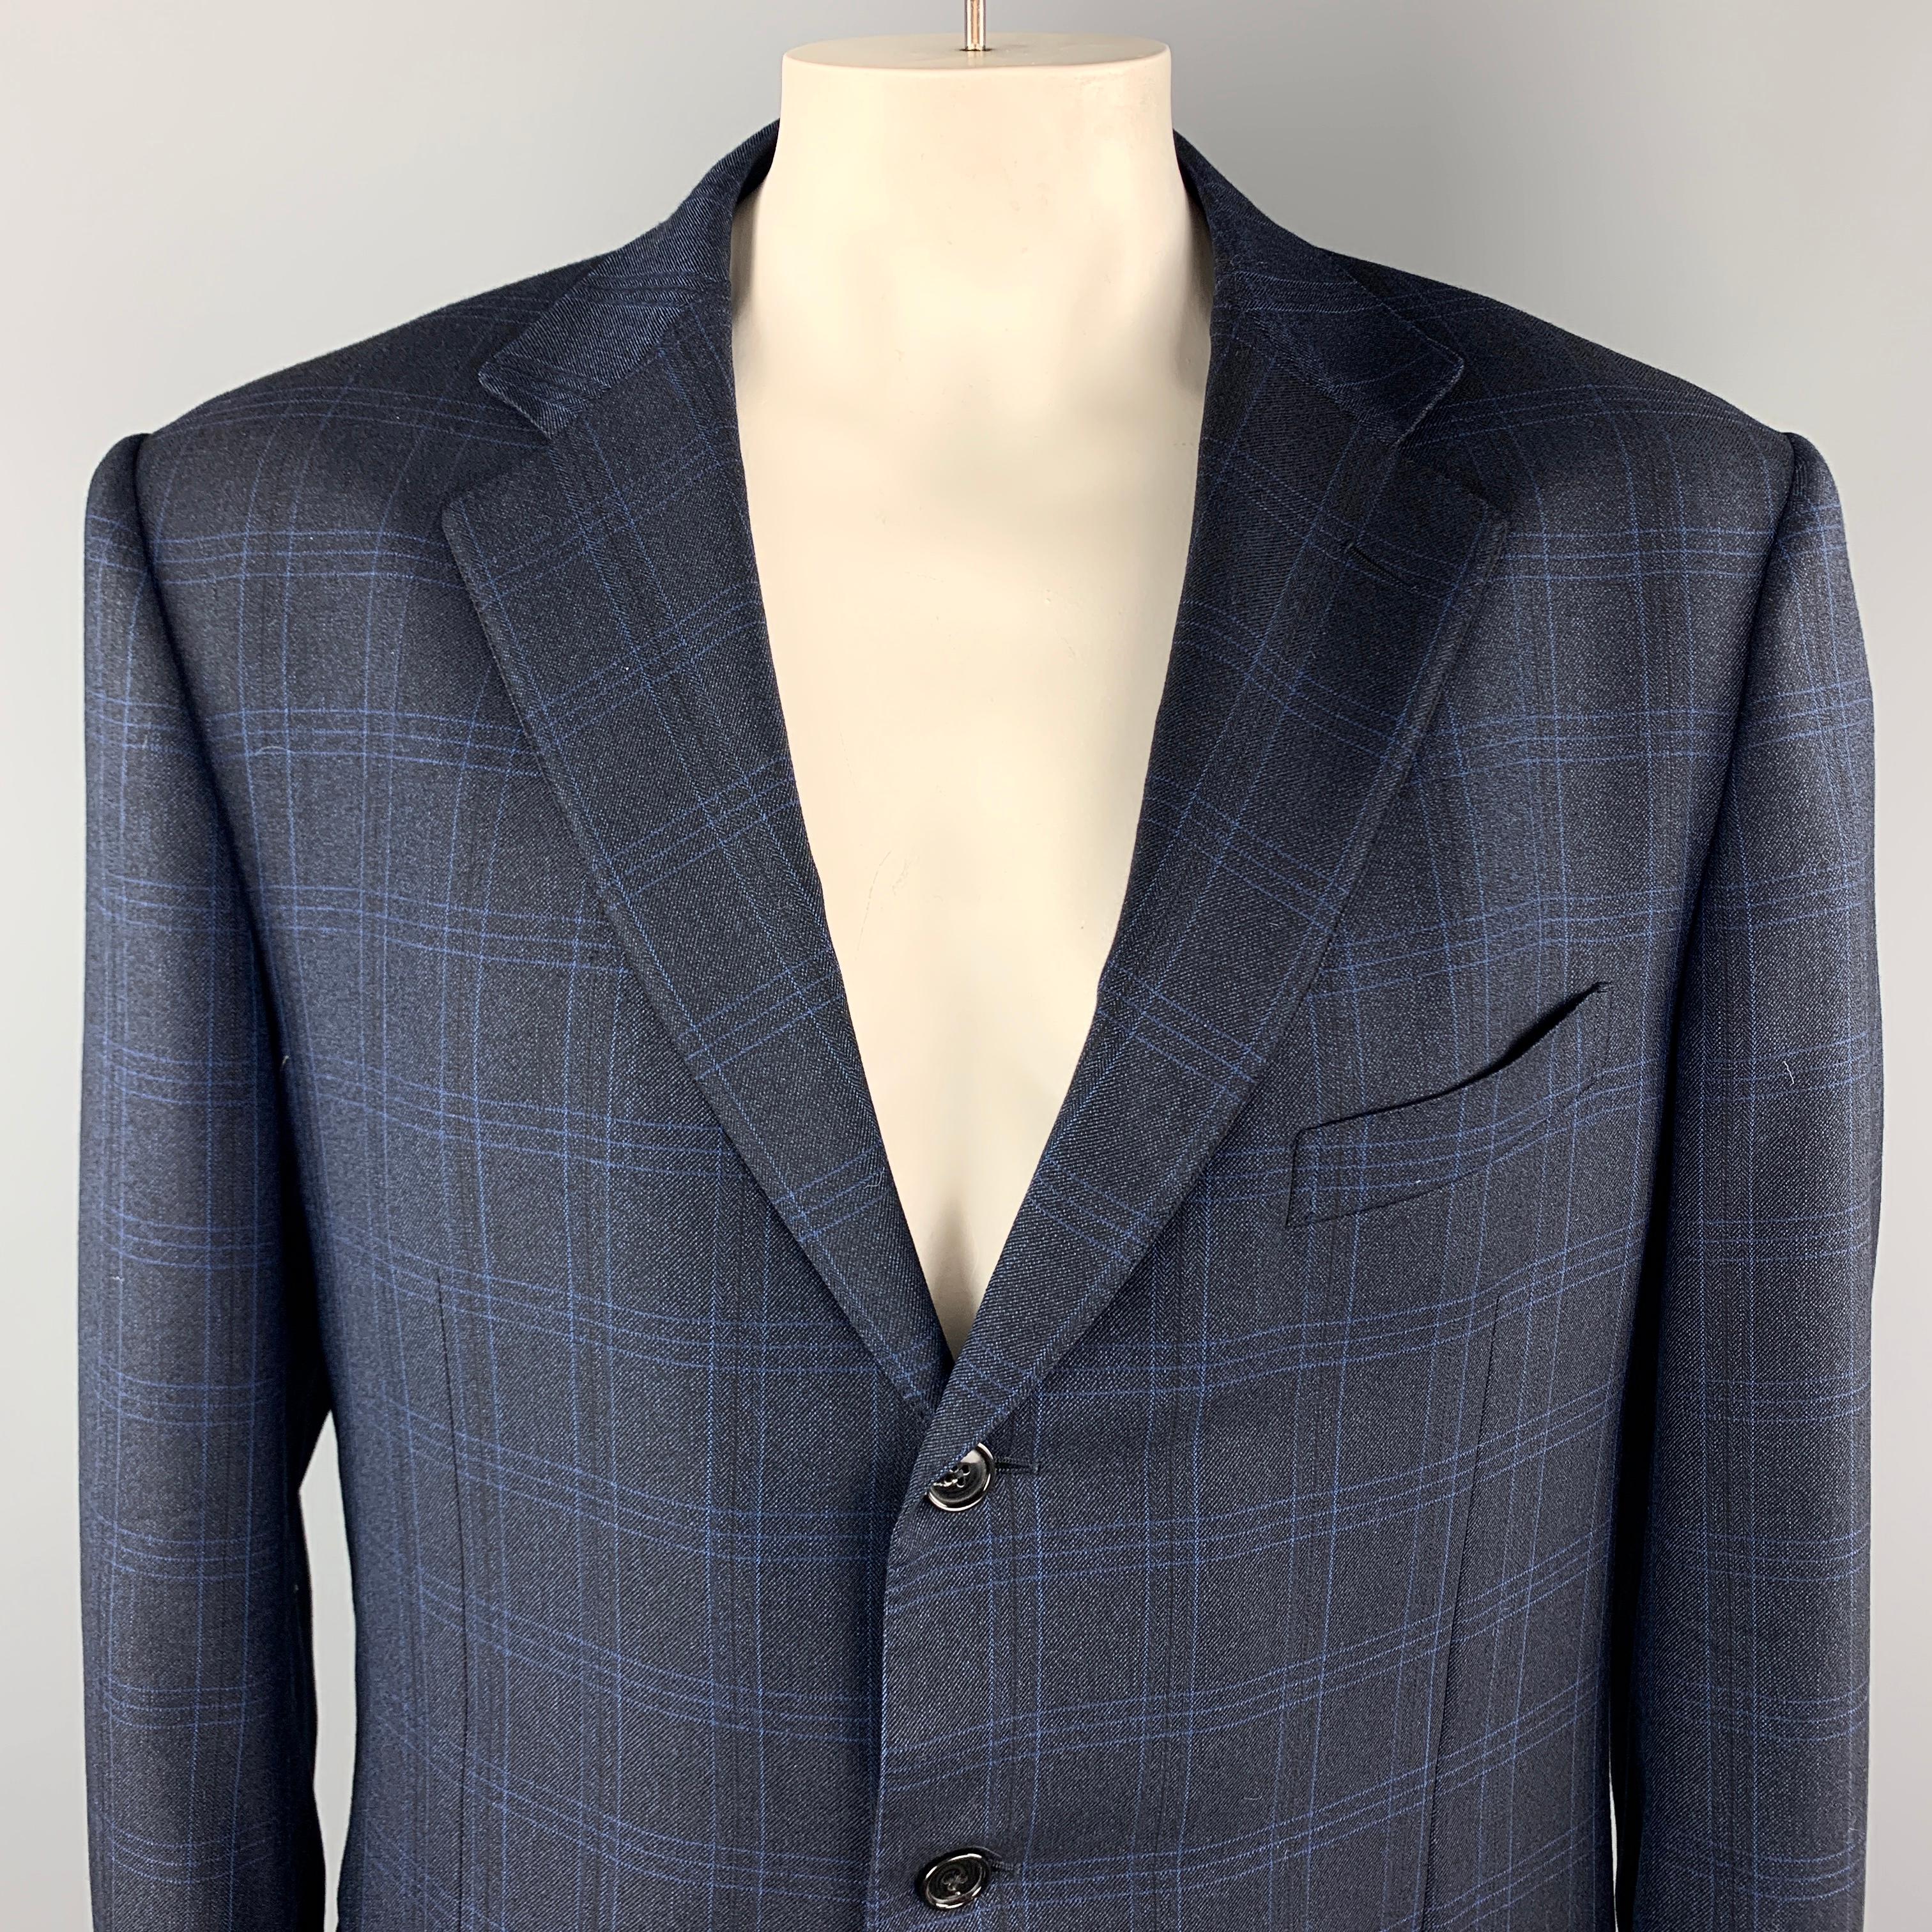 ERMENEGILDO ZEGNA Long Sport Coat comes in a navy plaid wool material, with a notch lapel, slit and flap pockets, three buttons at closure, single breasted, buttoned cuffs, and a double vent at back. Made in Switzerland.

Excellent Pre-Owned